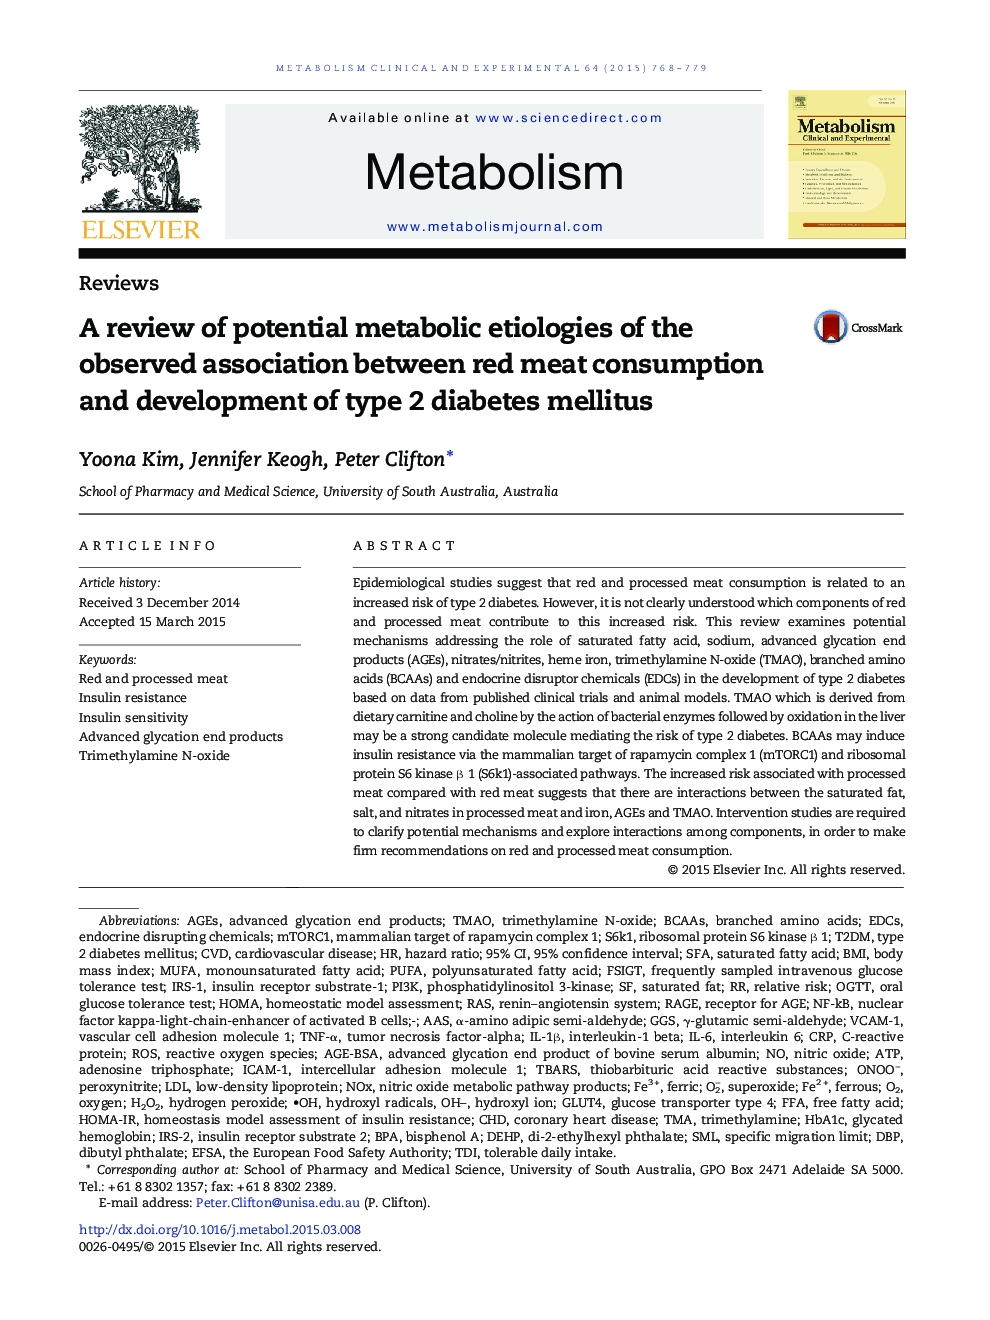 A review of potential metabolic etiologies of the observed association between red meat consumption and development of type 2 diabetes mellitus